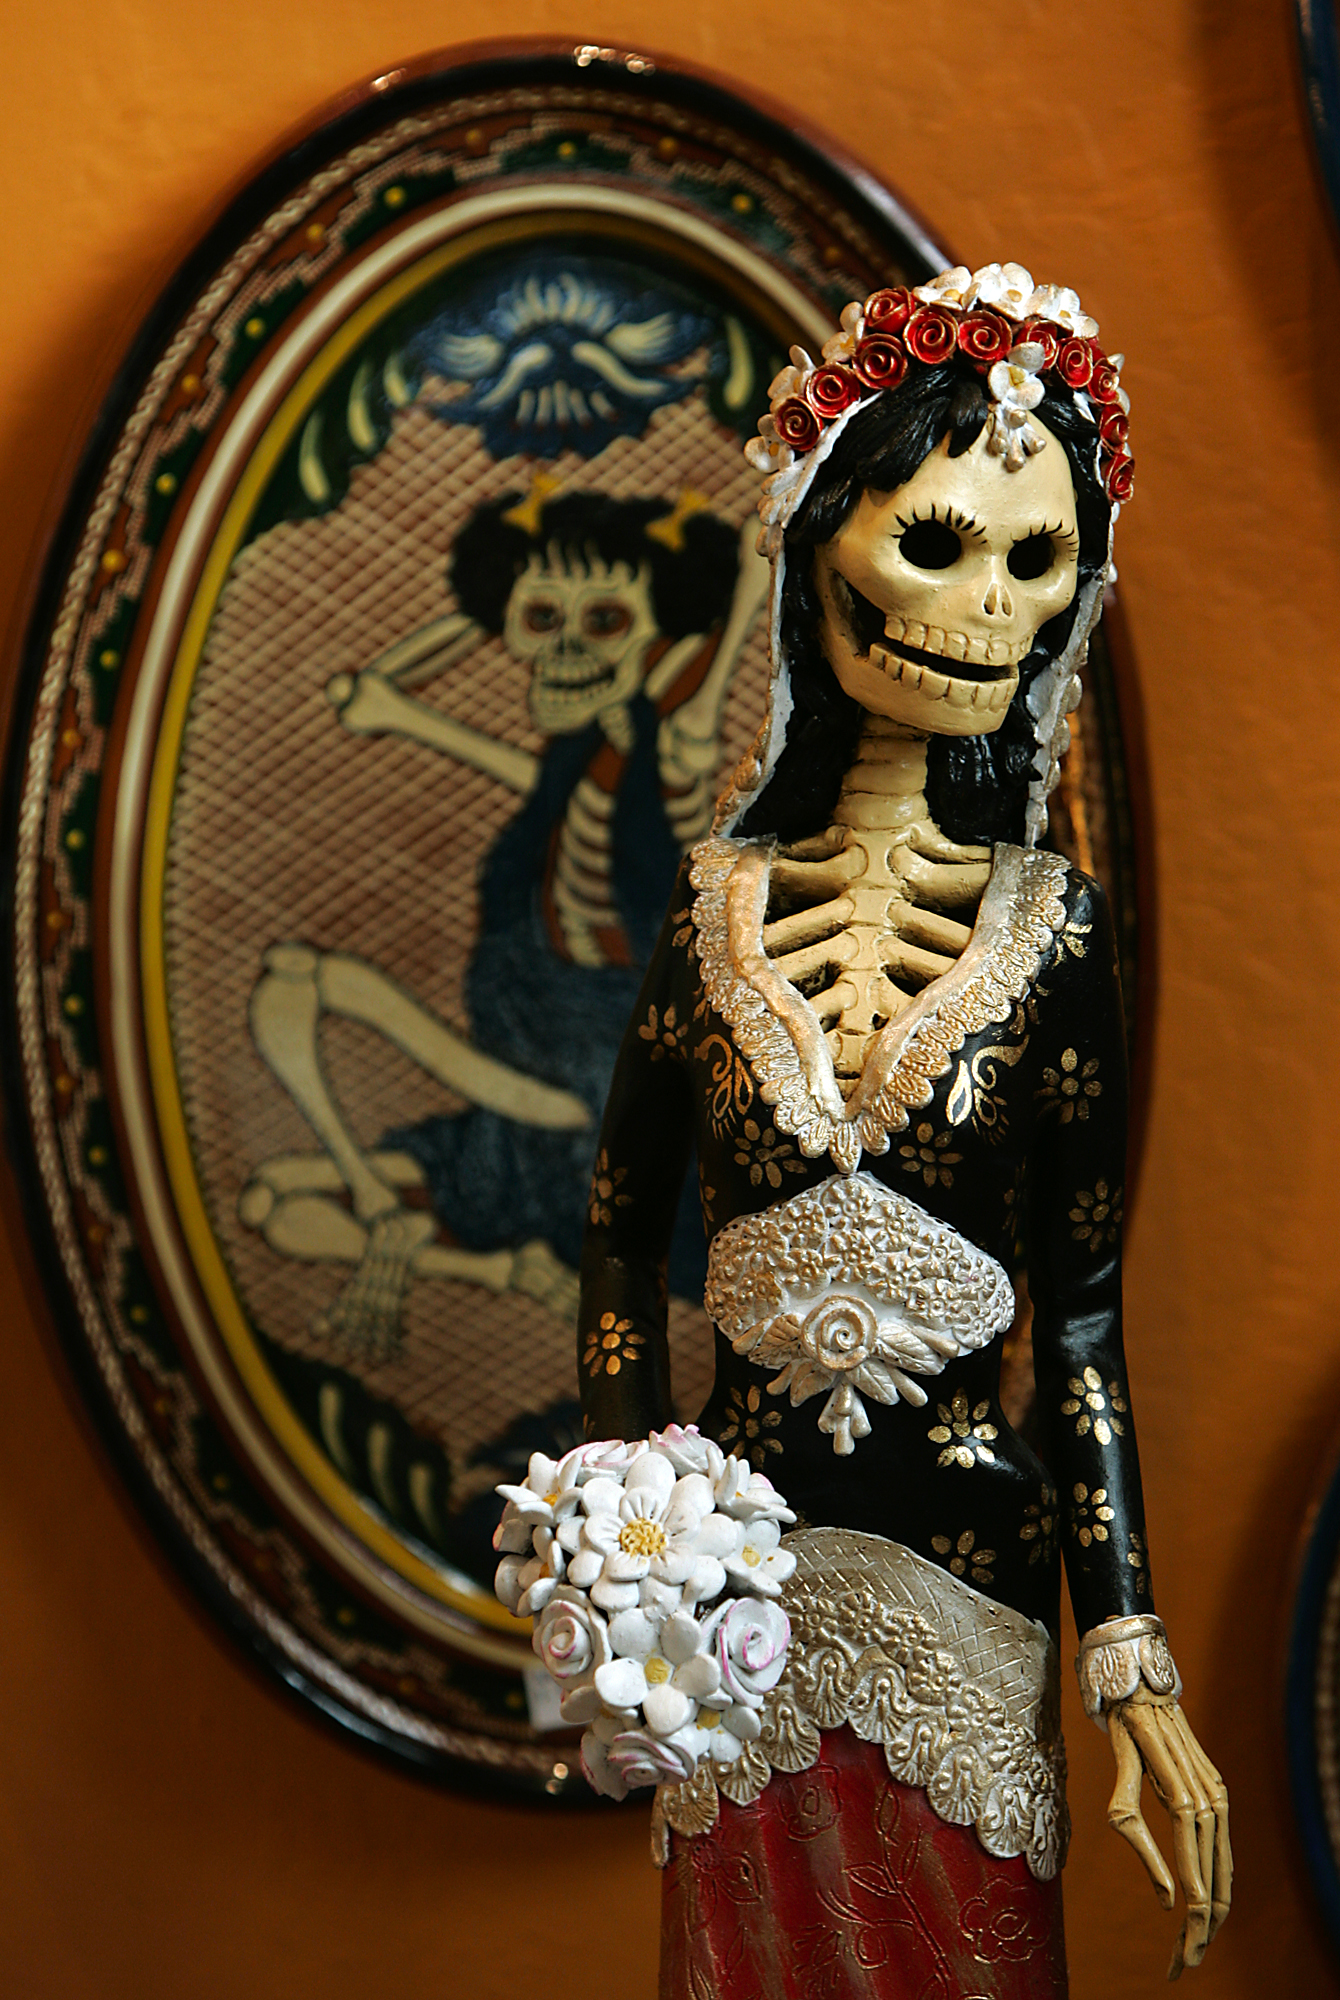 11/1/2009:D9: A skeletal figurine with guitar at the Petaluma Arts Center. PC: Catrina figures, a parody of the Mexican upper class female with bouquet often are a prominent part of modern Day of the Dead observances.